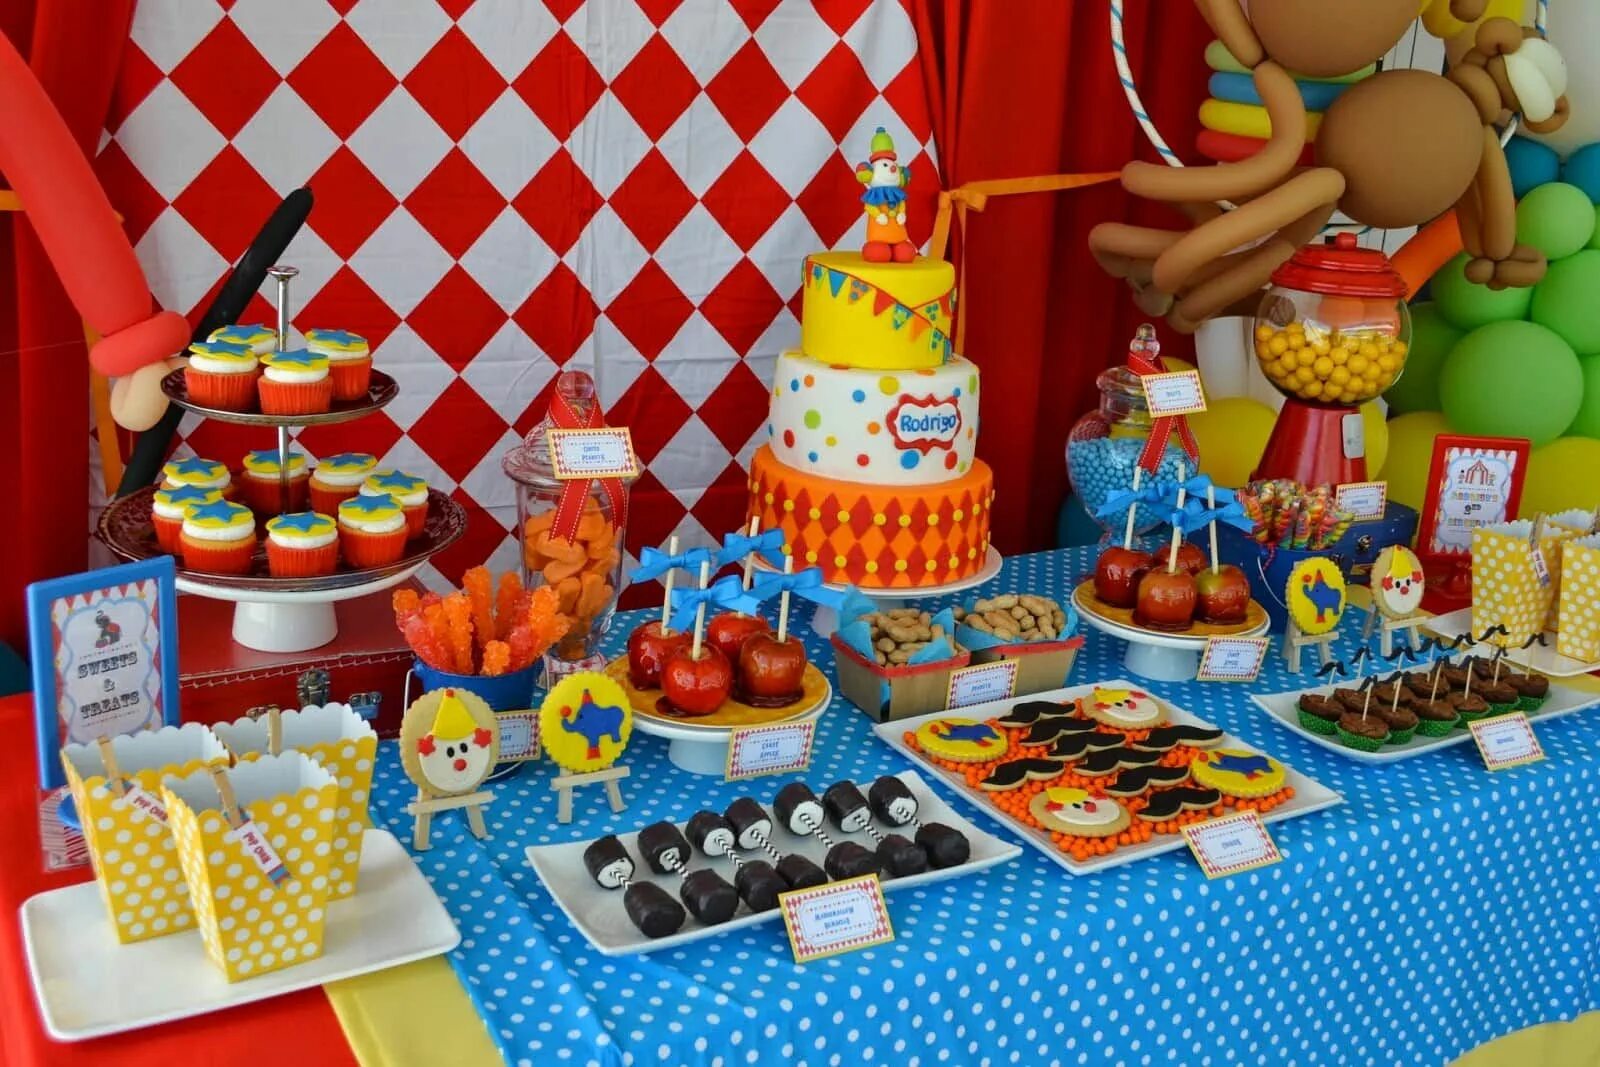 Birthday activities. The Birthday Party. Birthday Party activities. Birthday Party ideas. Boy Birthday Party.